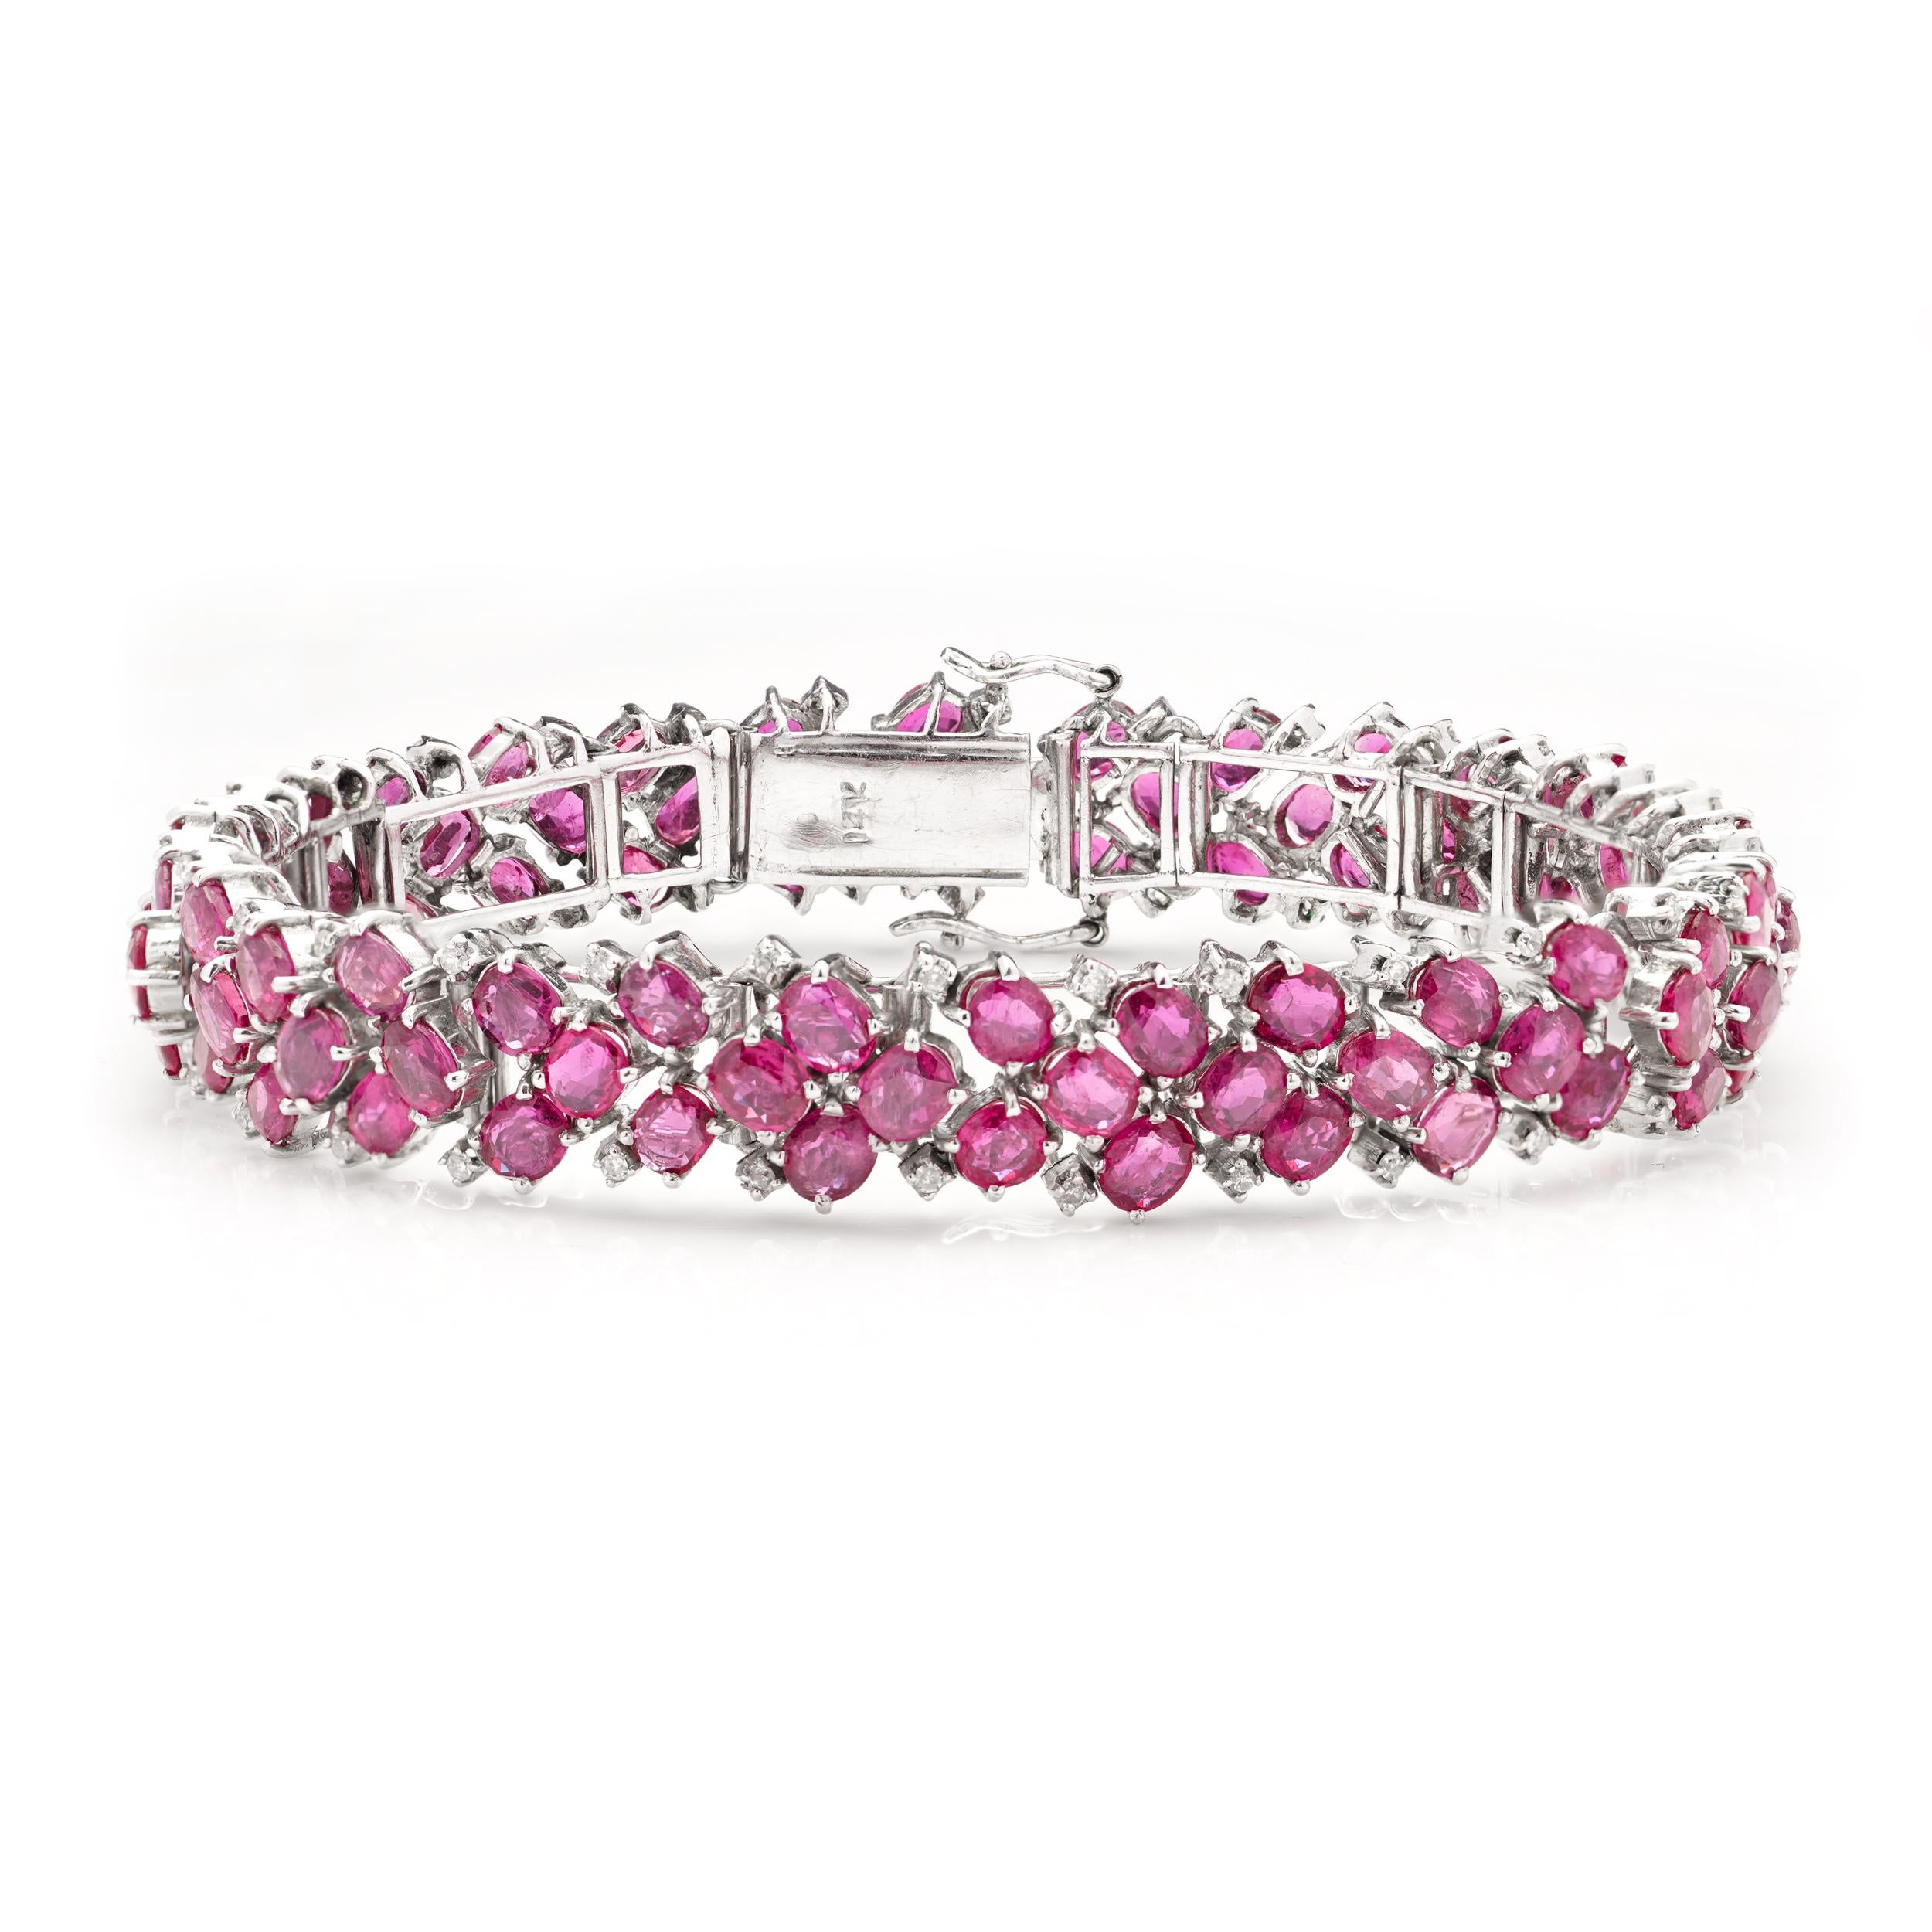 14kt. white gold link bracelet set with 22.5 carats of oval faceted rubies  For Sale 1